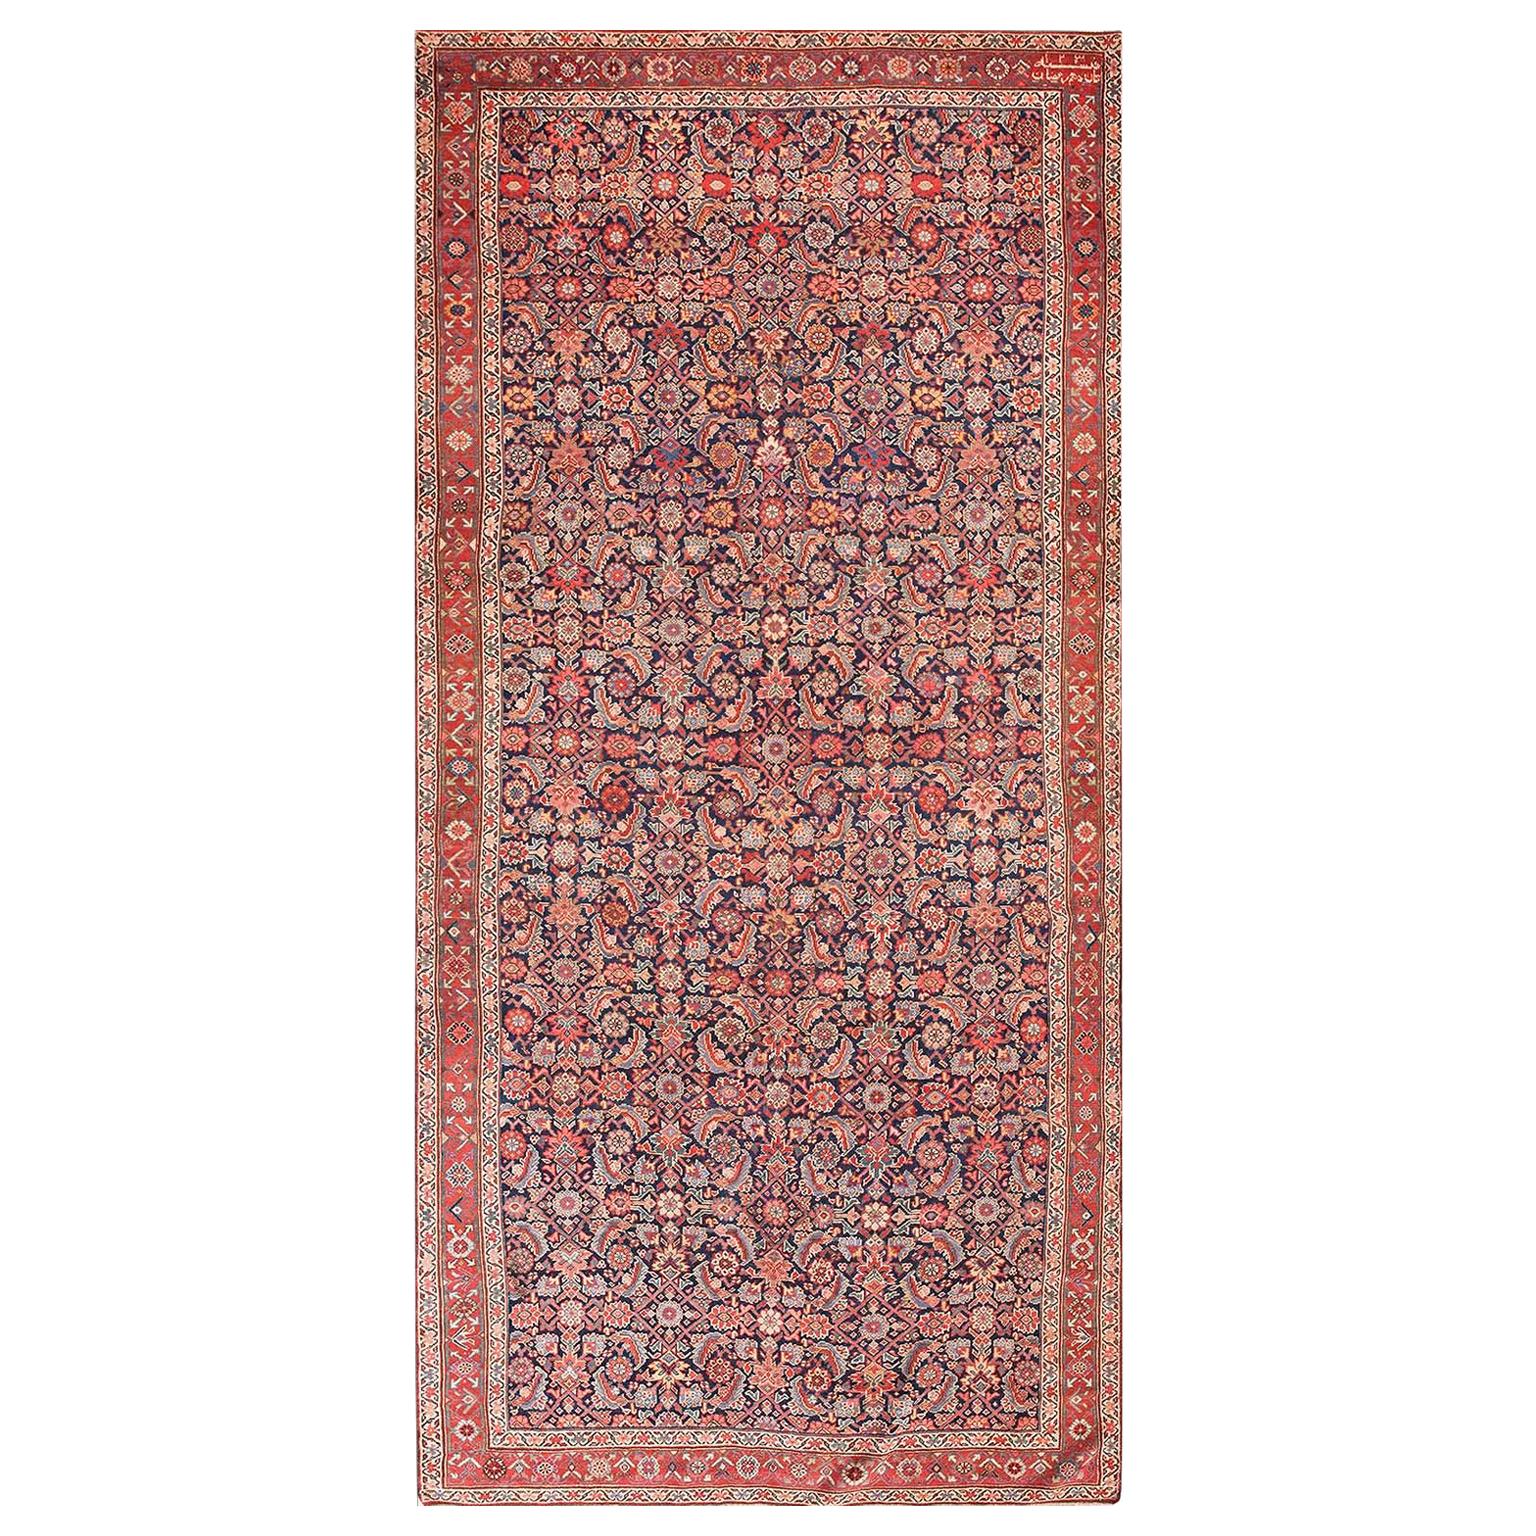 Early 19th Century N.W. Persian Carpet Dated 1814 ( 5'6" x 11'2" - 168 x 340 ) For Sale